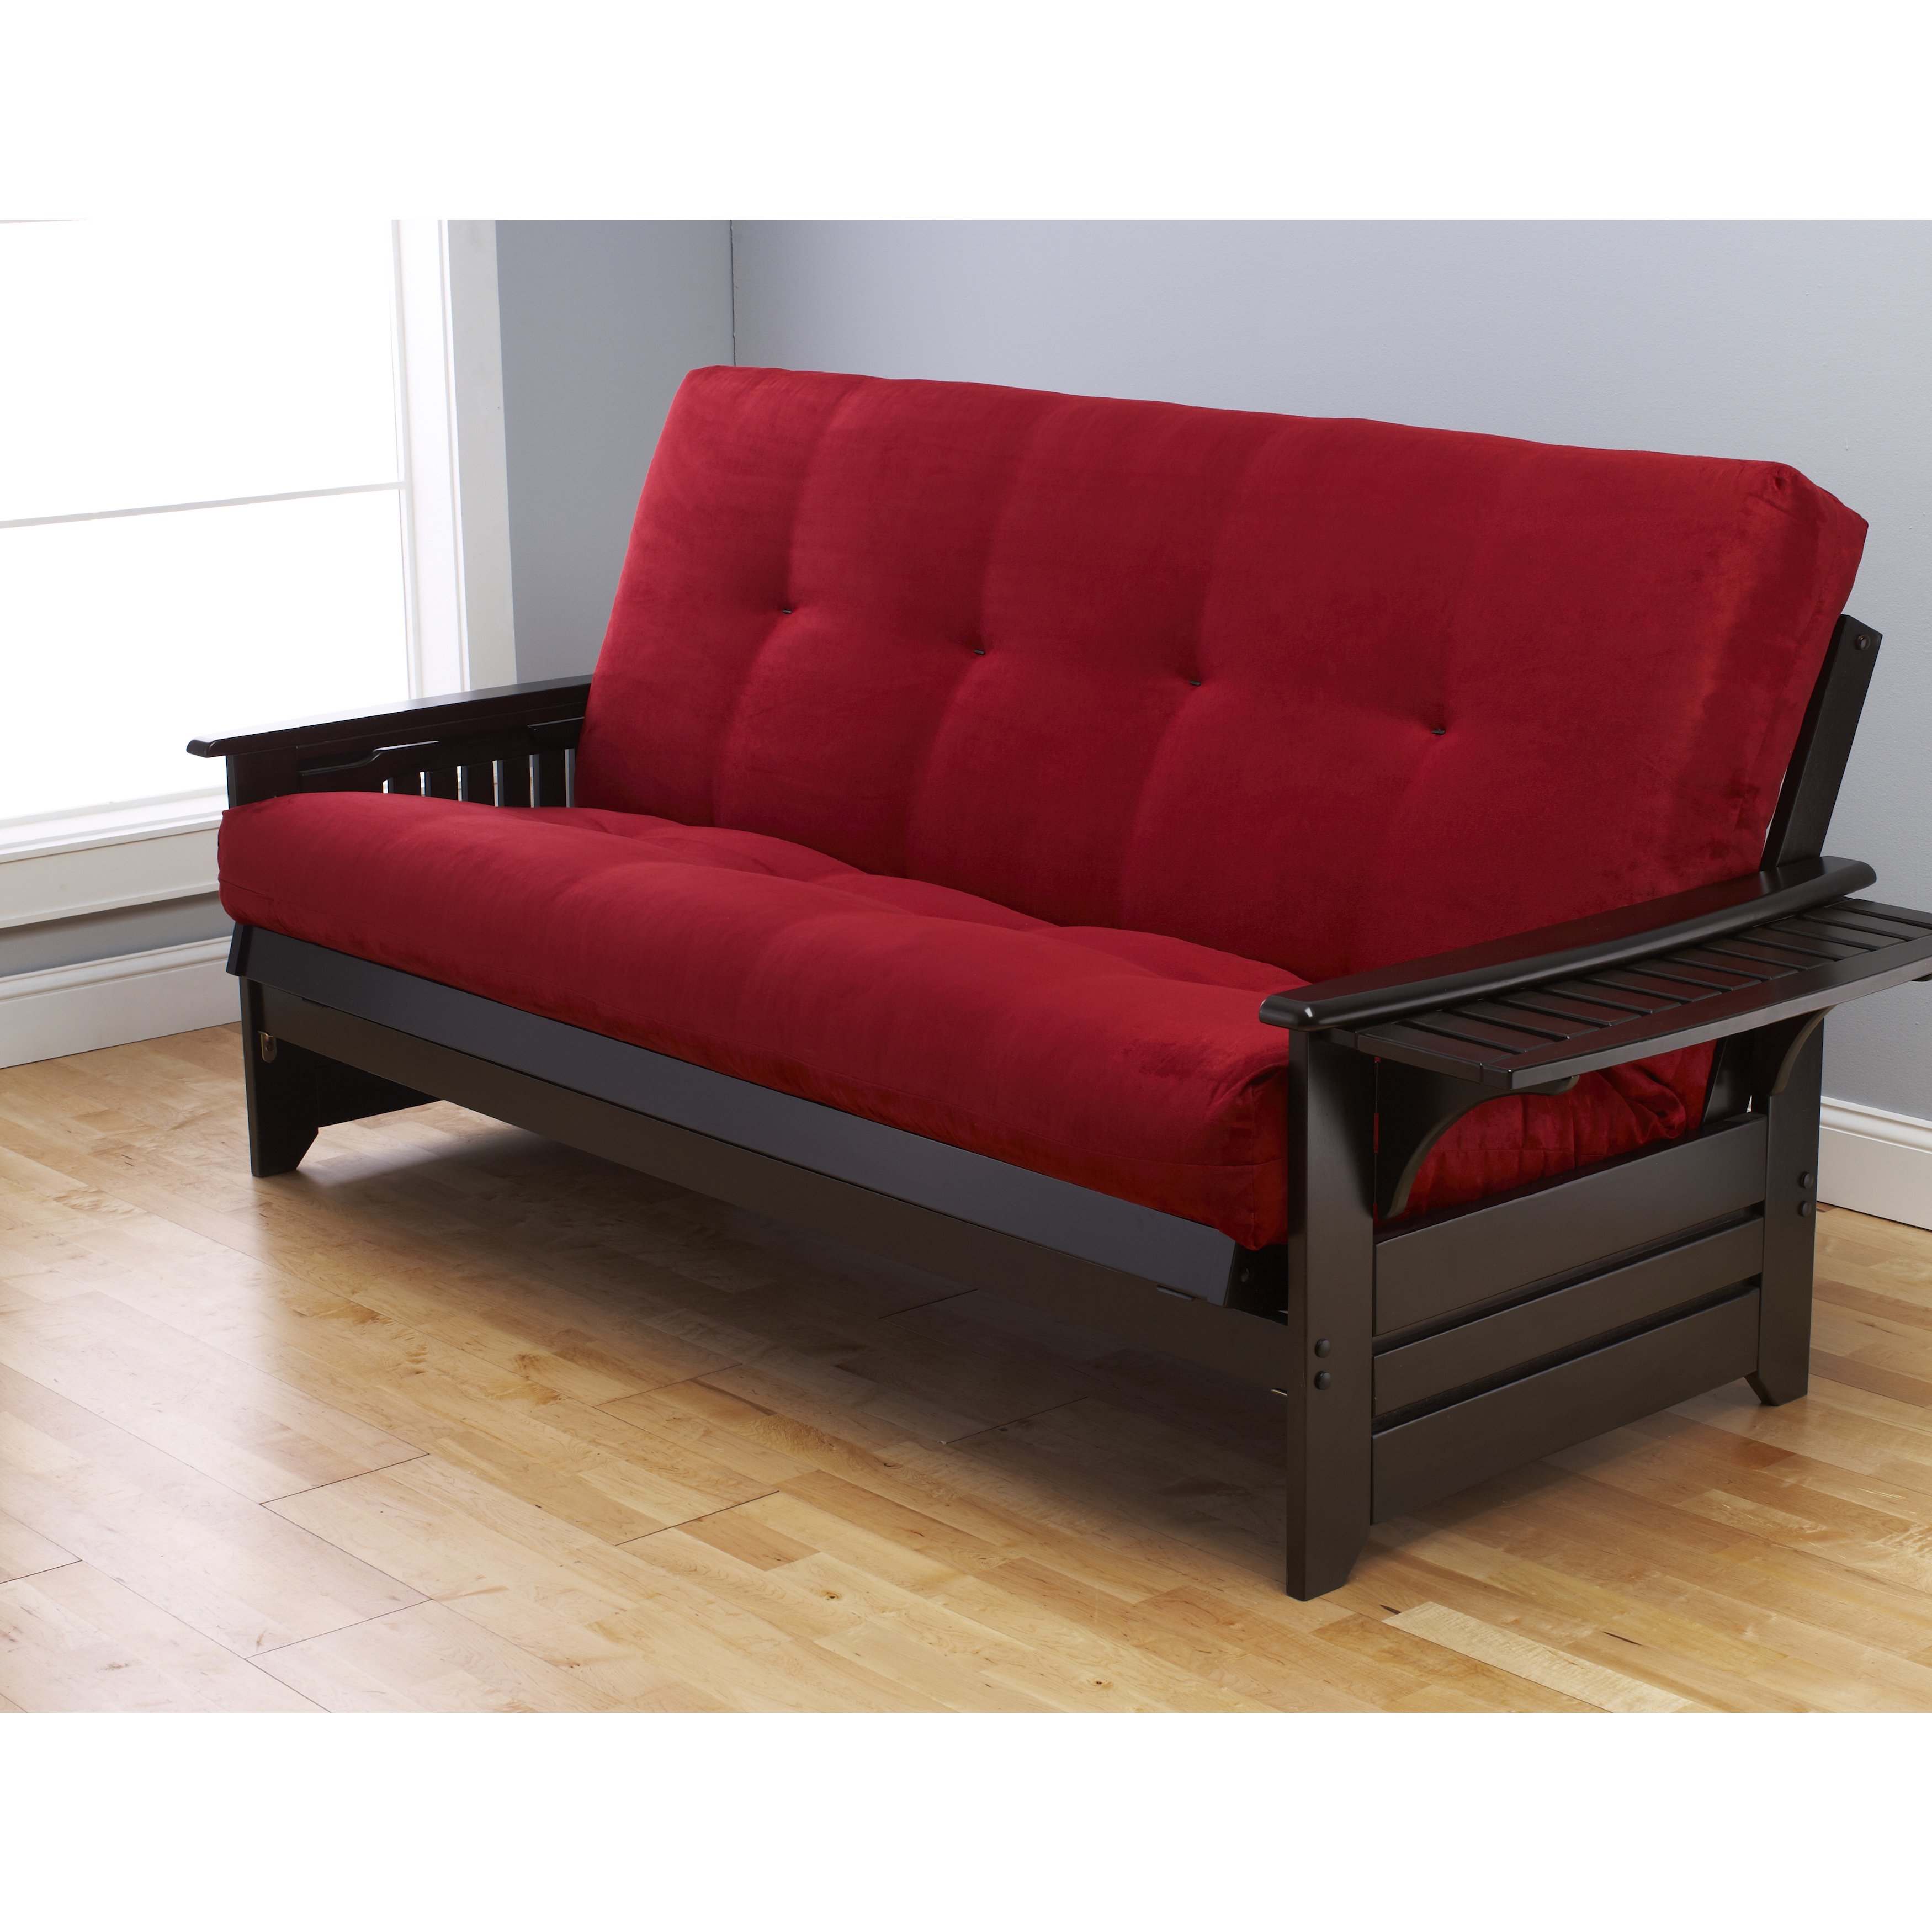 Shop Porch & Den DeSoto Hardwood Queen-Size Futon Bed with Innerspring  Mattress - Free Shipping Today - Traveller Location - 10011484